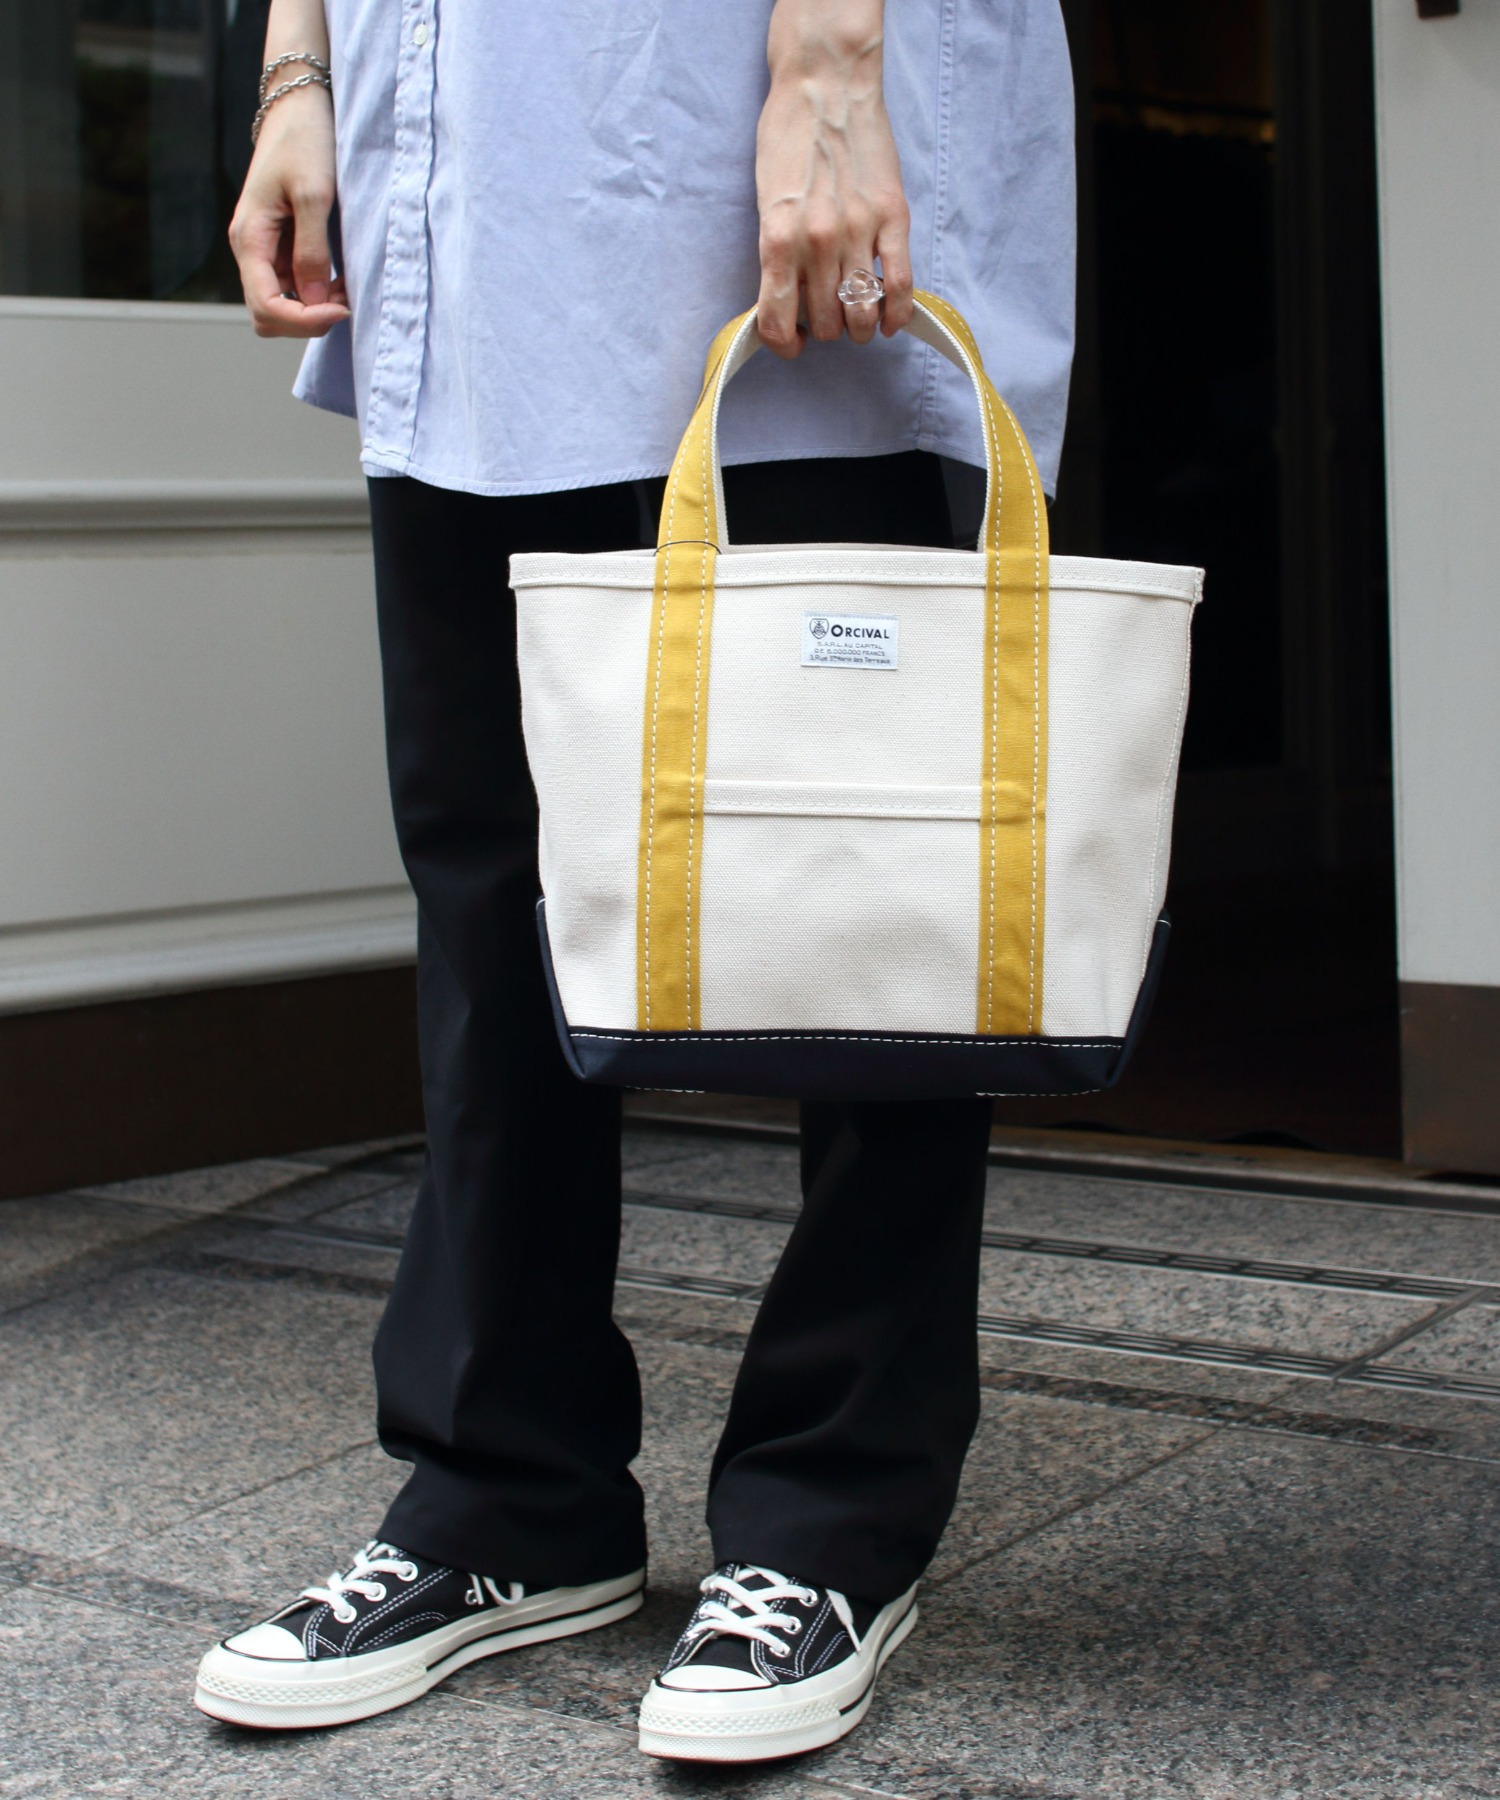 ORCIVAL/オーシバル トートバッグ TOTE BAG 2TONE RC-7060HVC 22AW